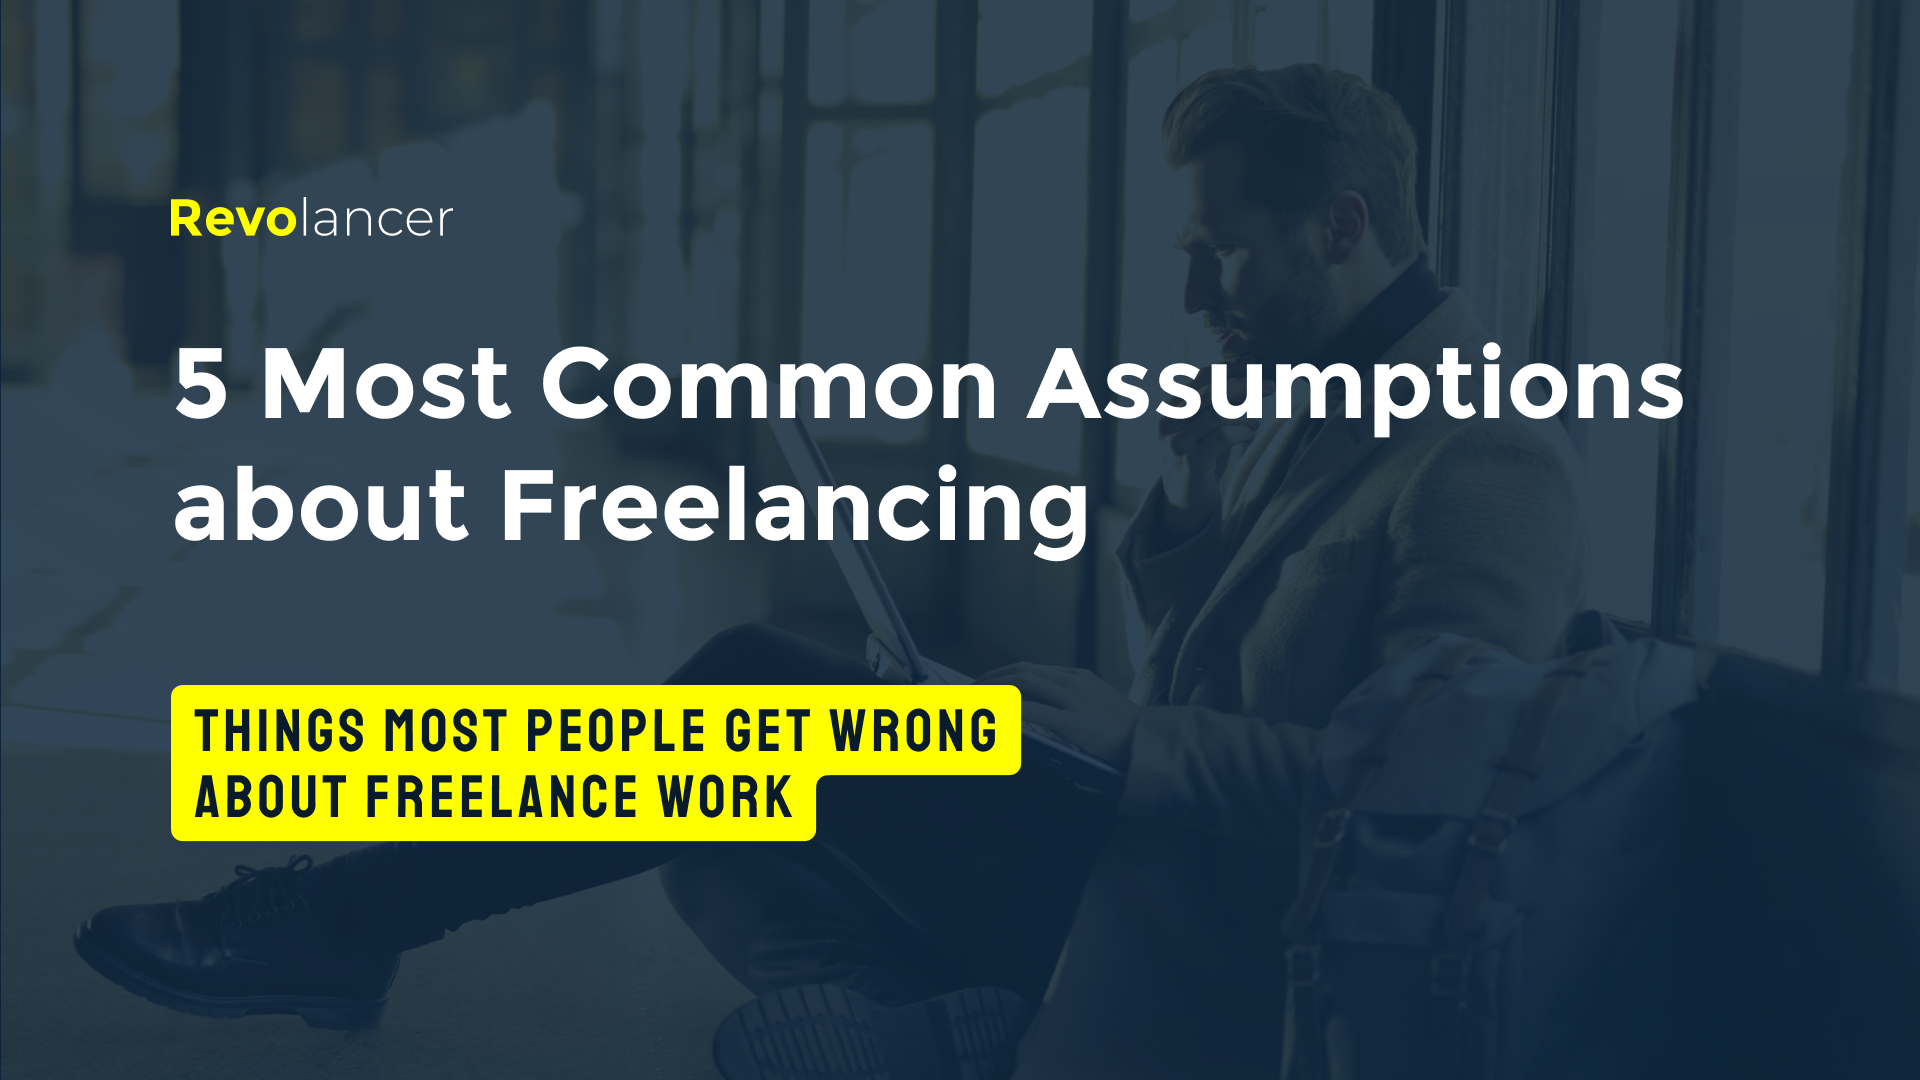 5 Most Common Assumptions about Freelancing